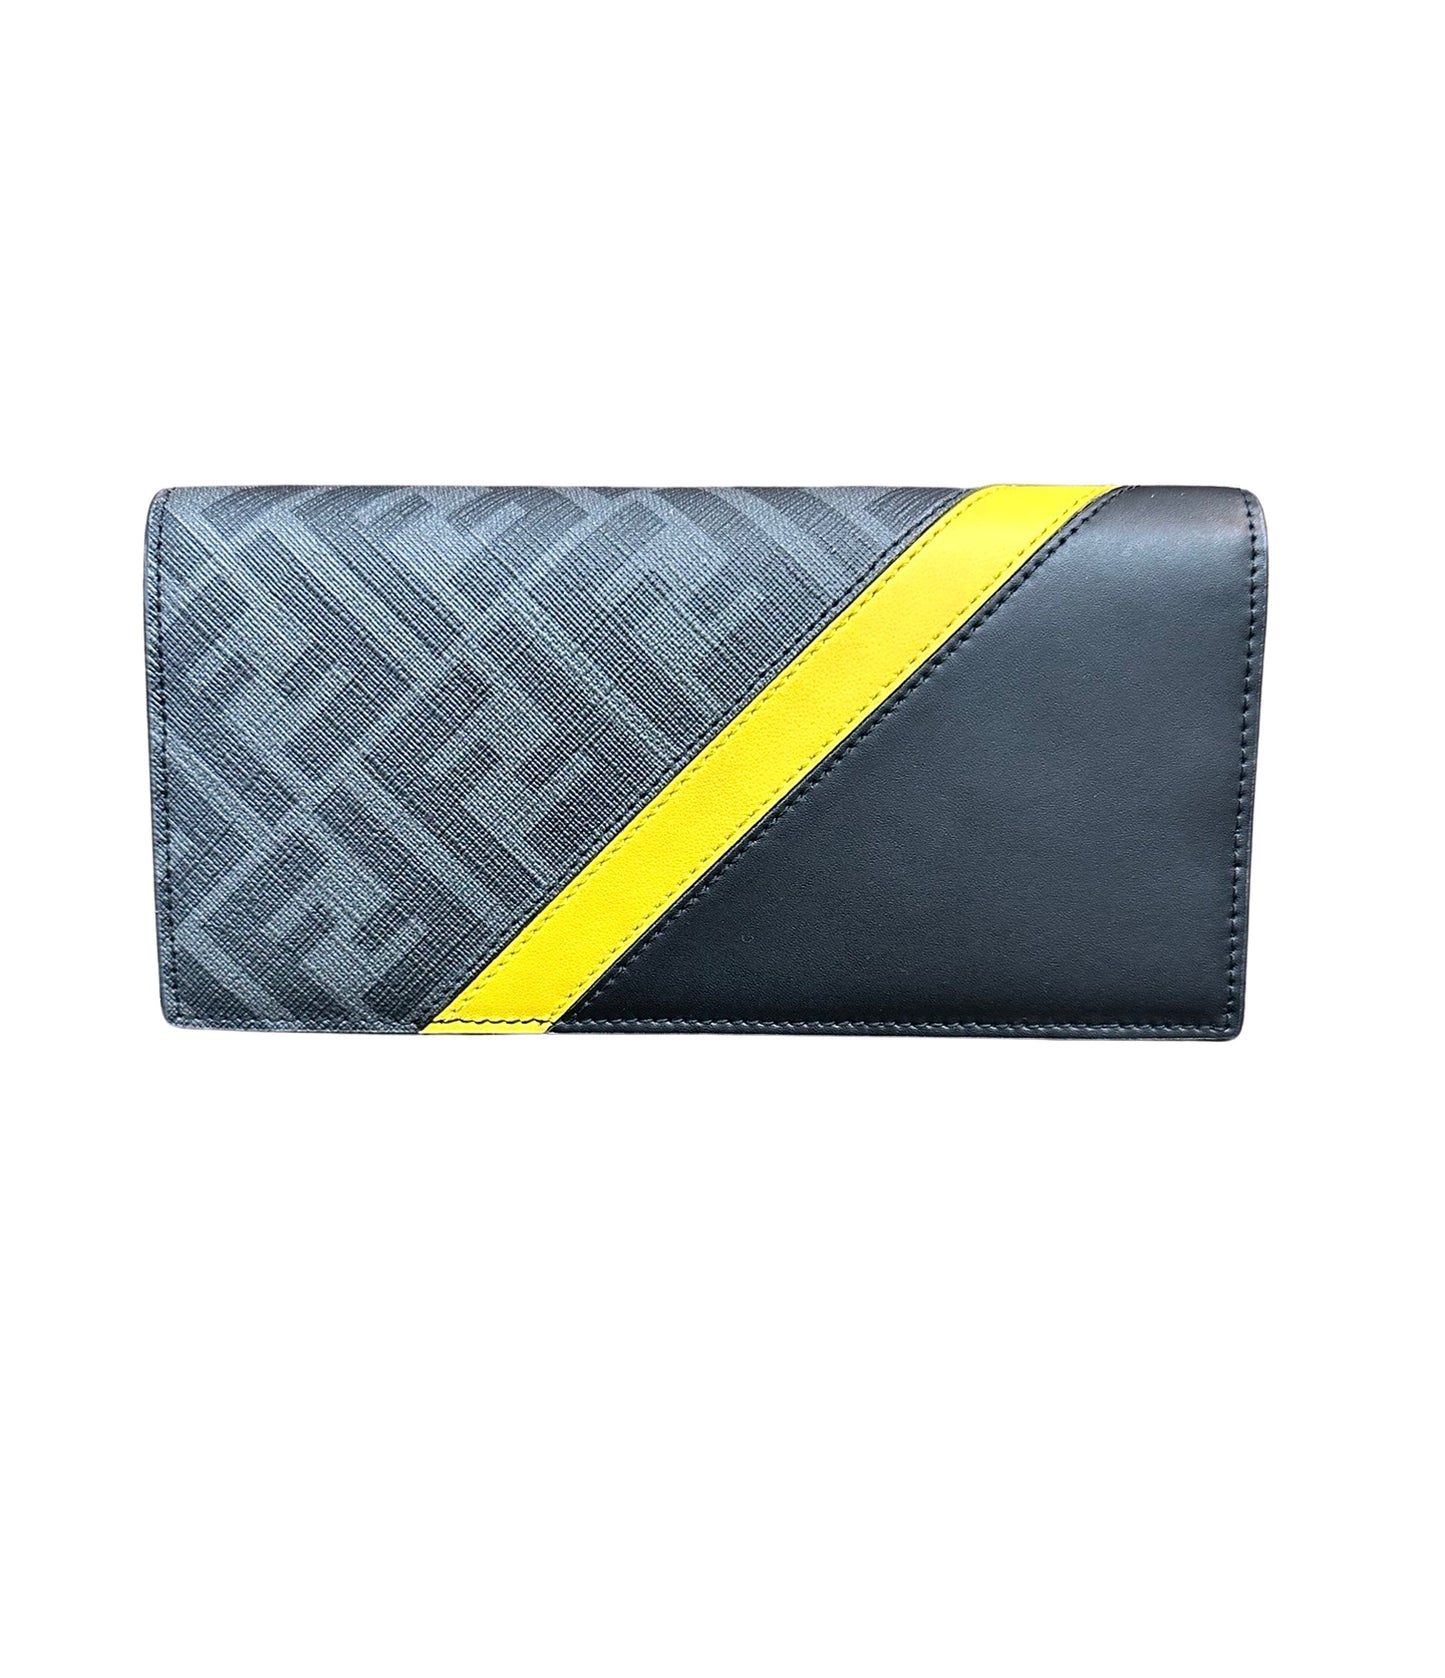 Front of wallet with grey textur + FF motif, yellow stripe, + black leather